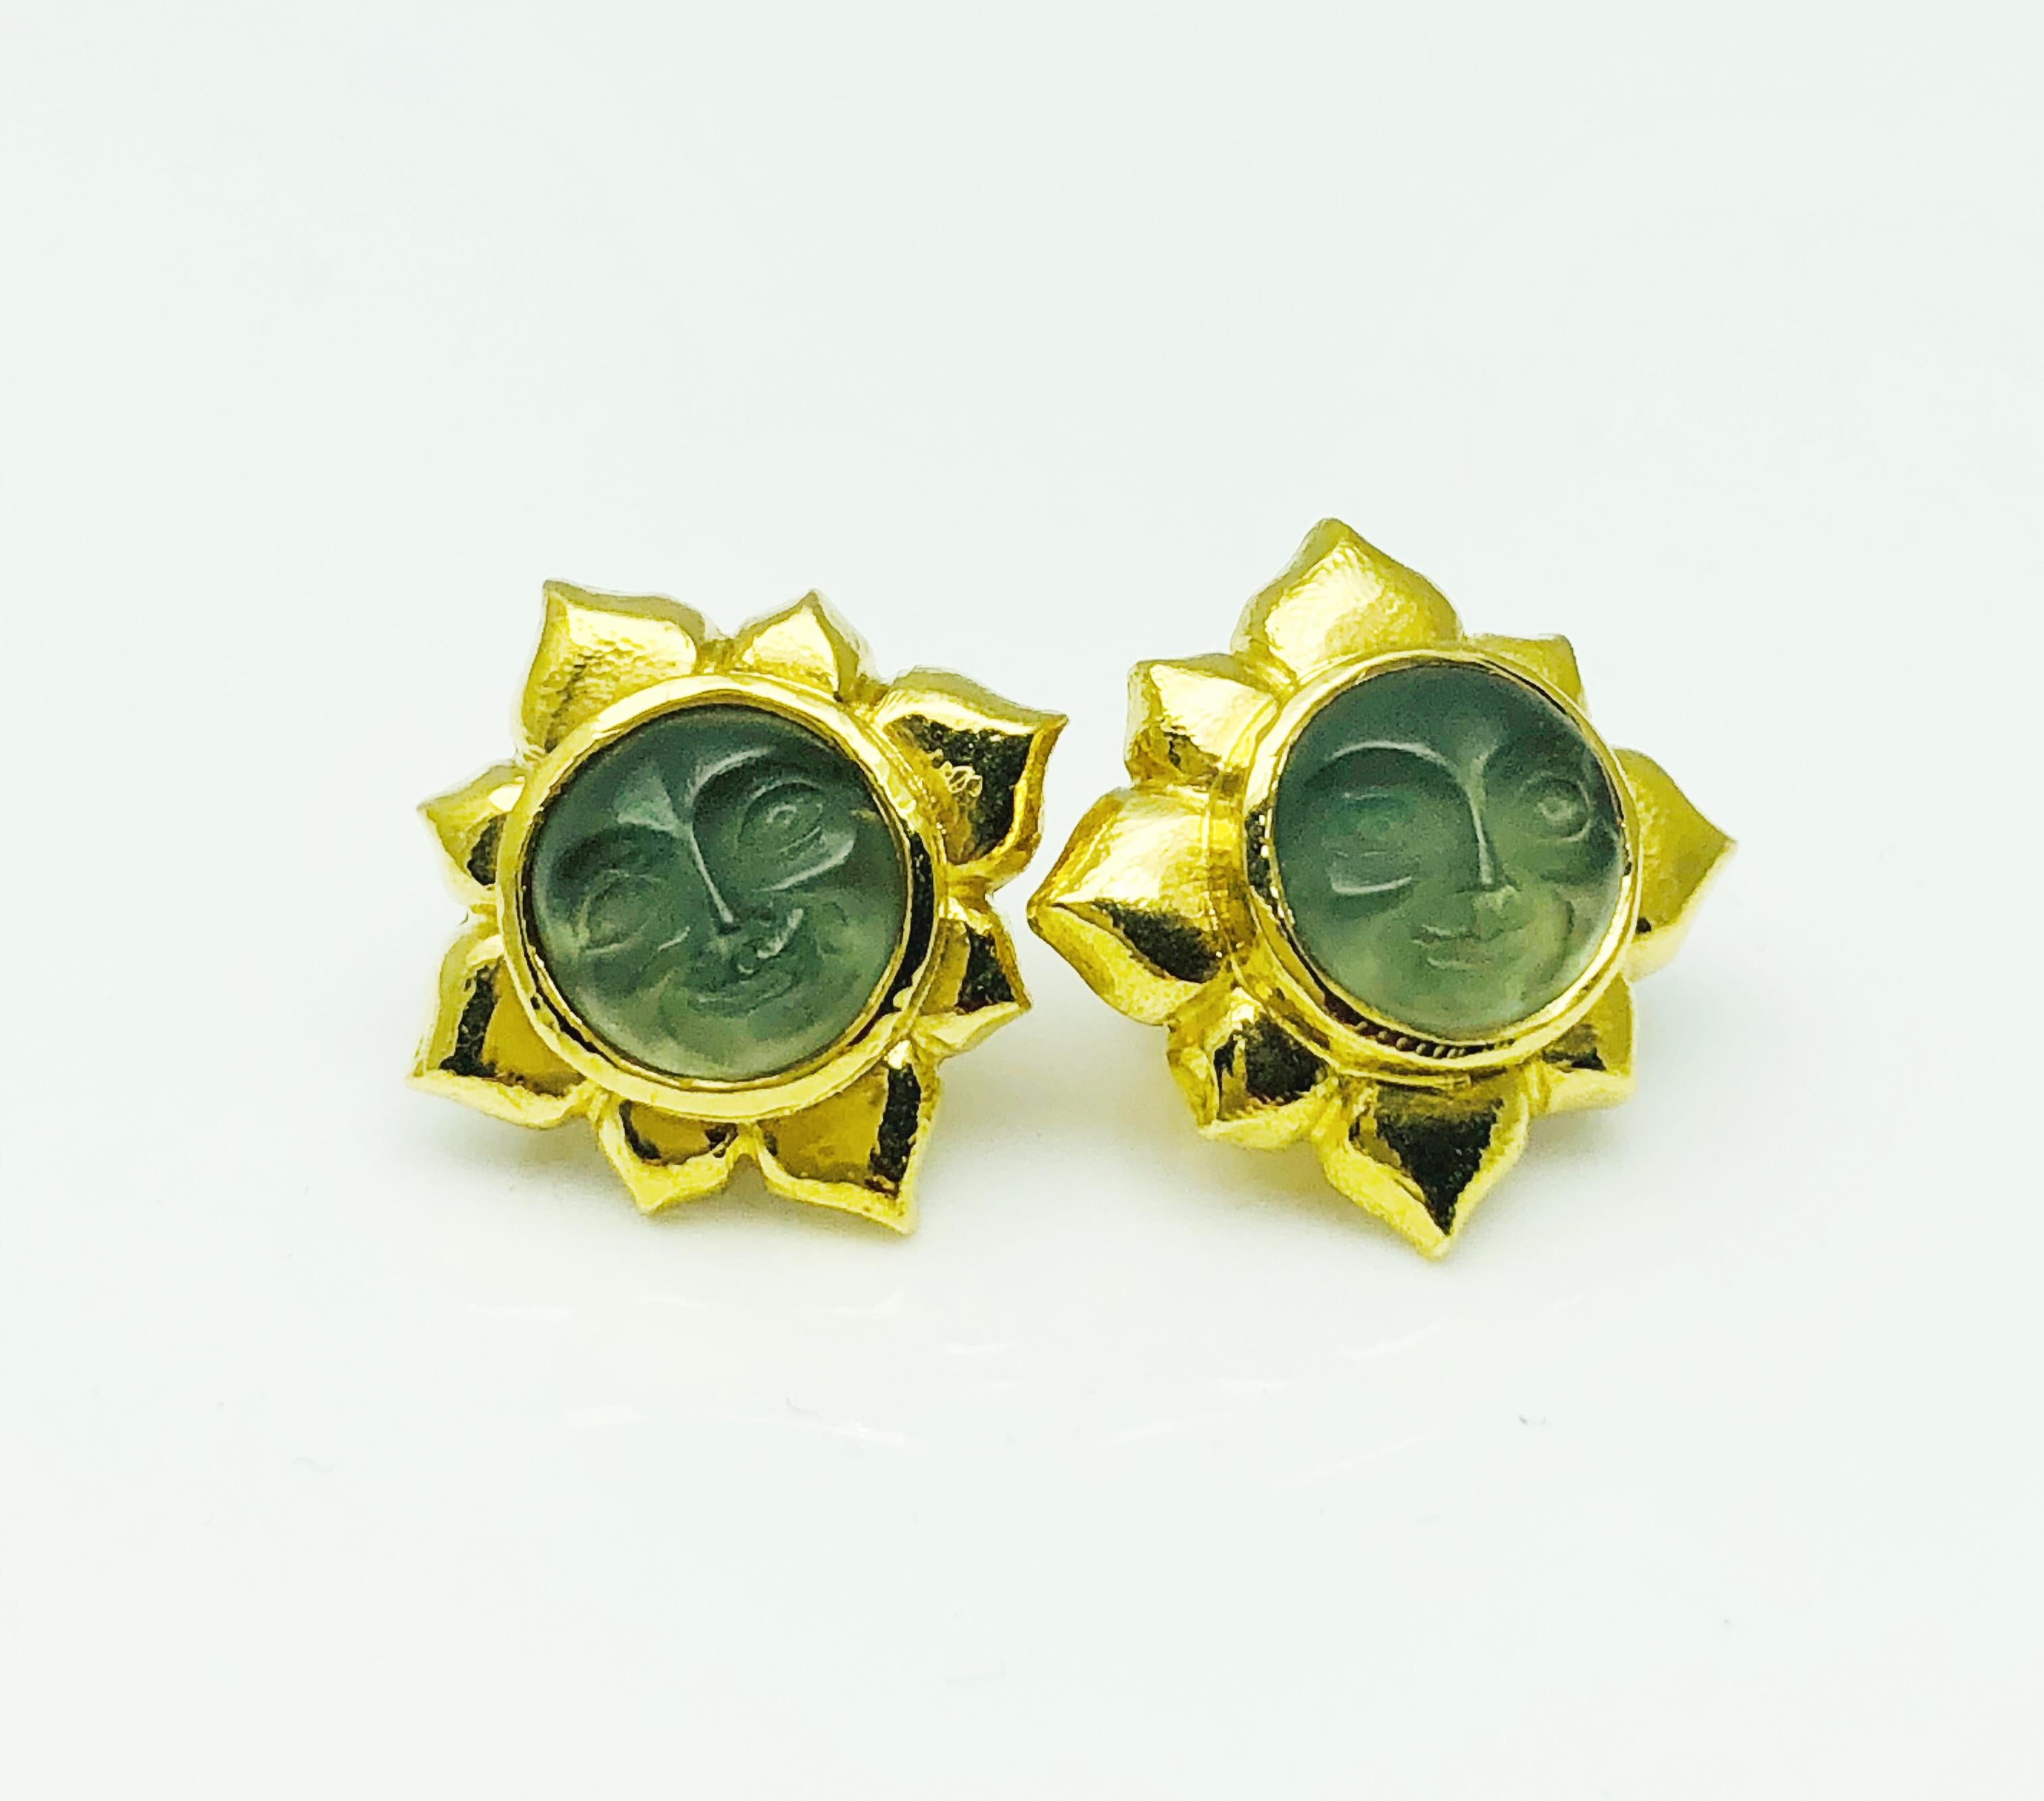 This is a beautiful and whimsical pair of earrings! Designed by Elizabeth Locke, this pair contains clear venetian glass, intaglio, bezel set, man in the moon face in an 18K Yellow gold setting with a gorgeous hammered finish. This pair can be